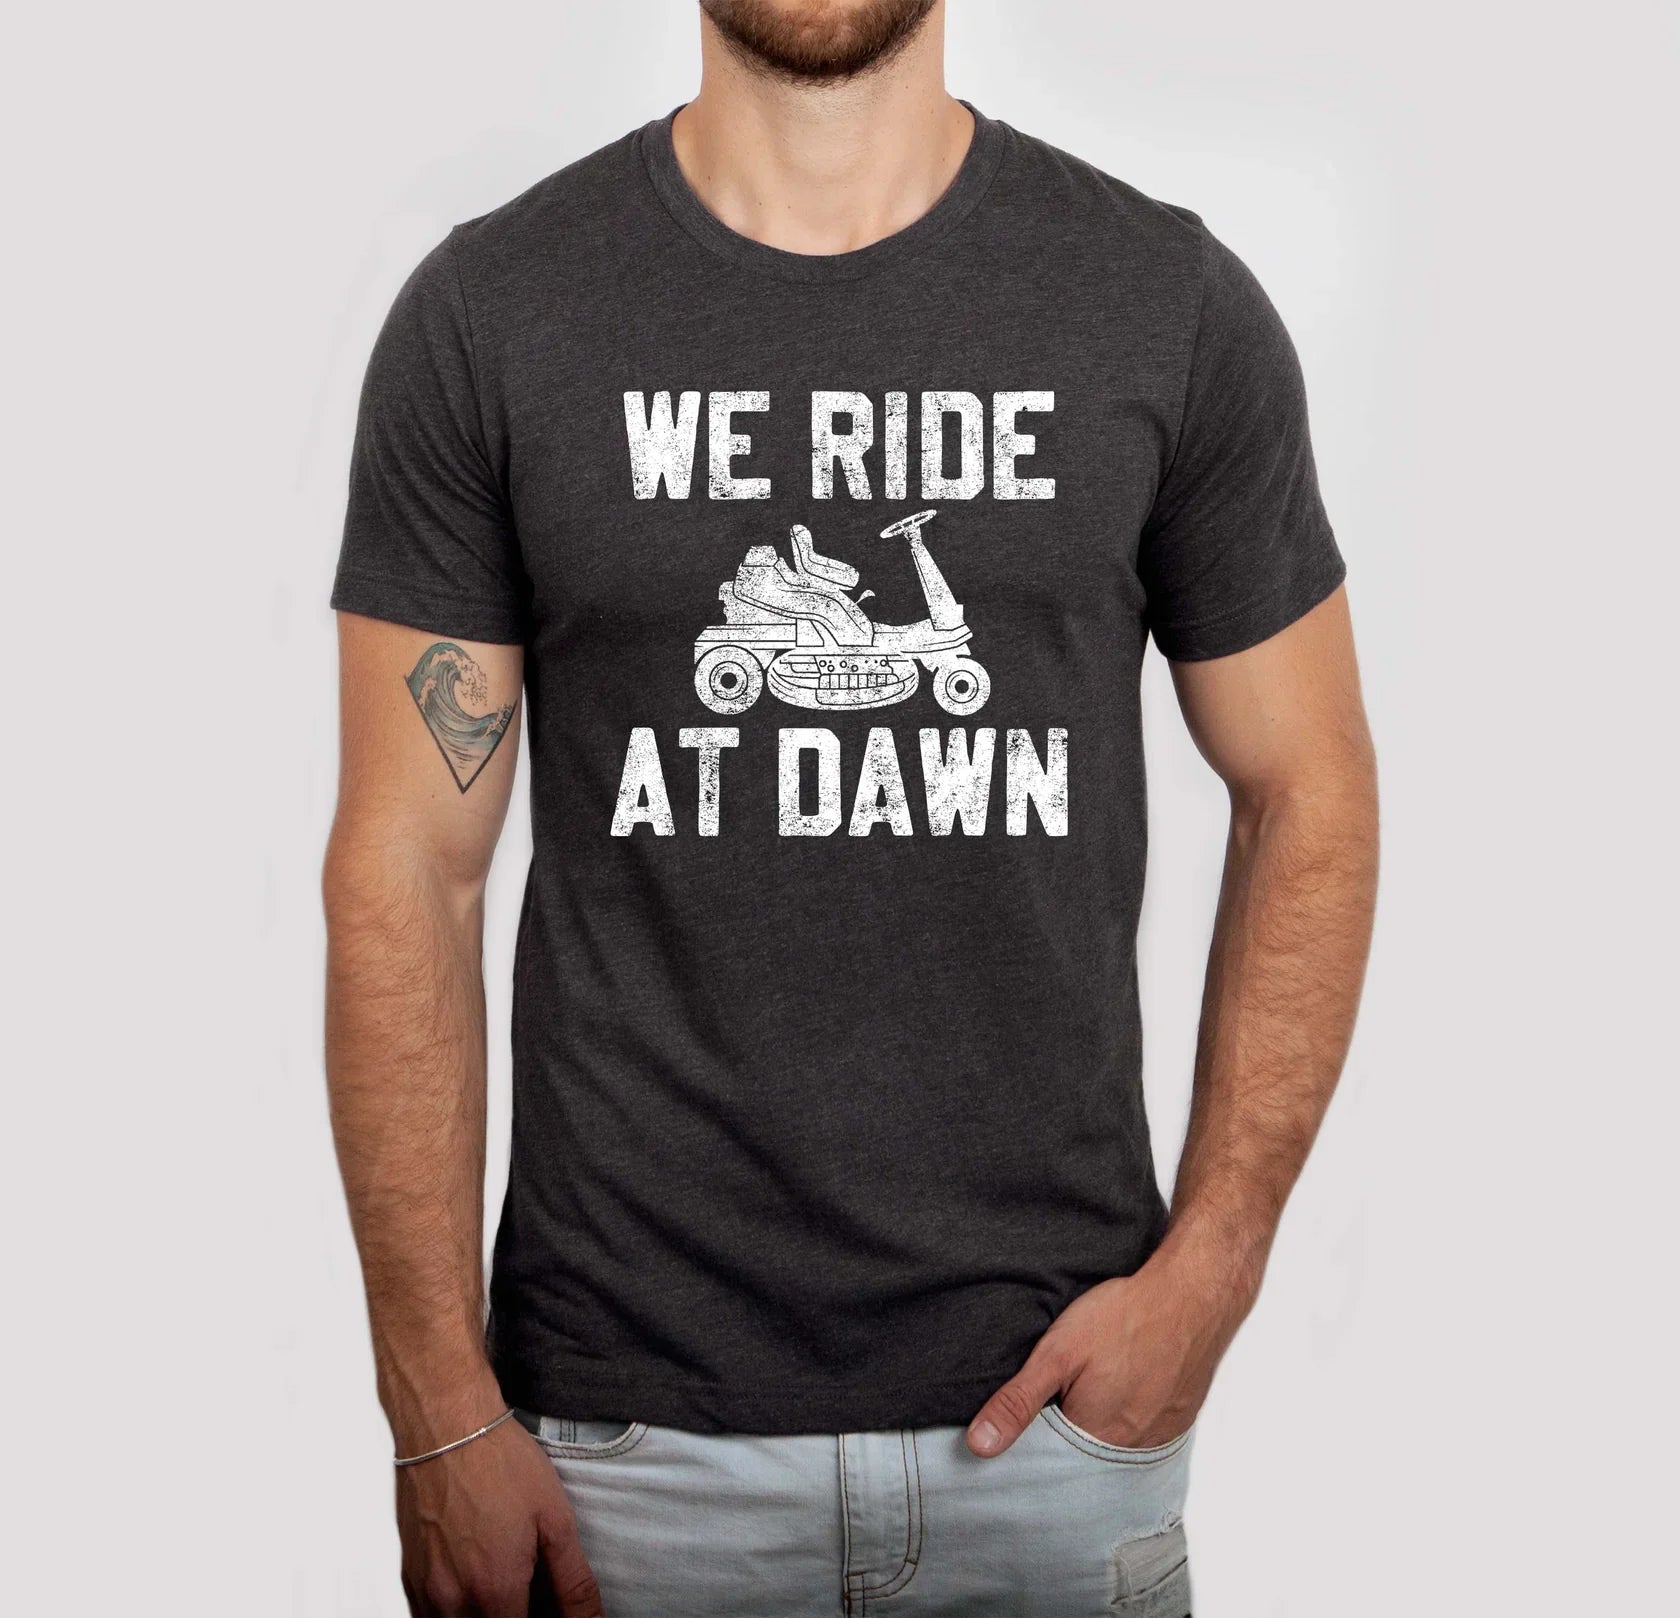 PREORDER: We Ride at Dawn Graphic Tee (Ships Early June)